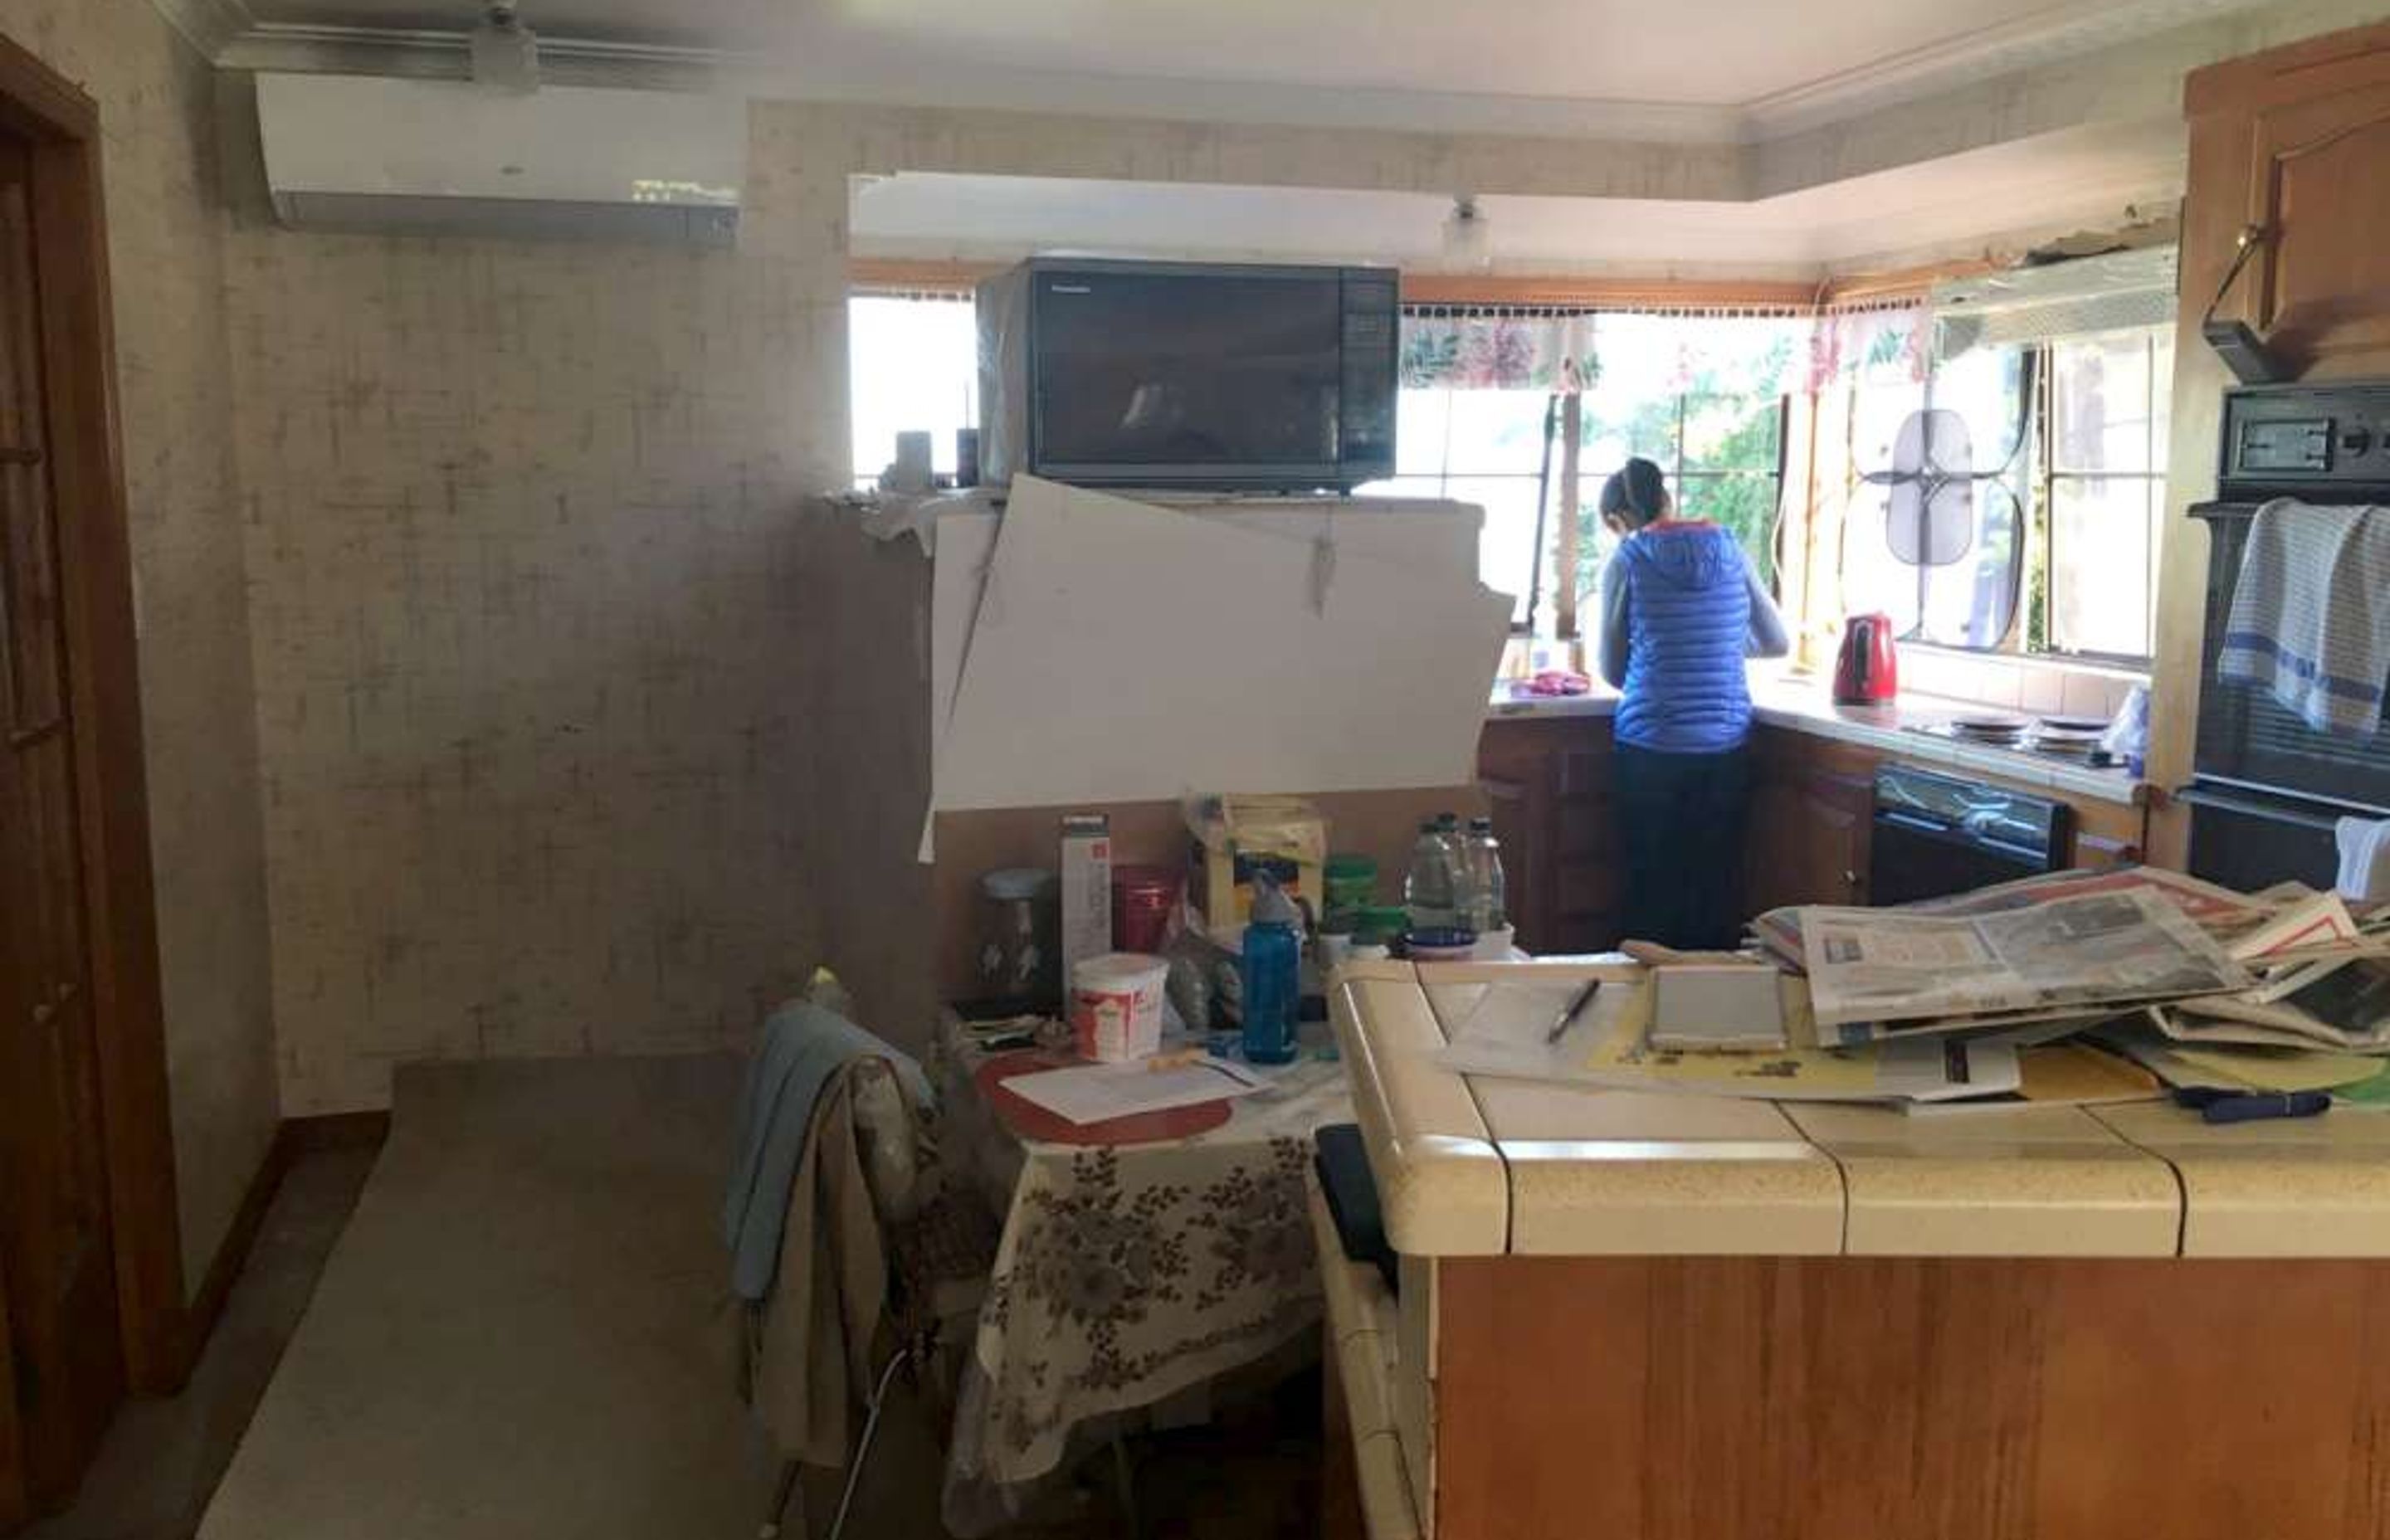 BEFORE The kitchen was renovated